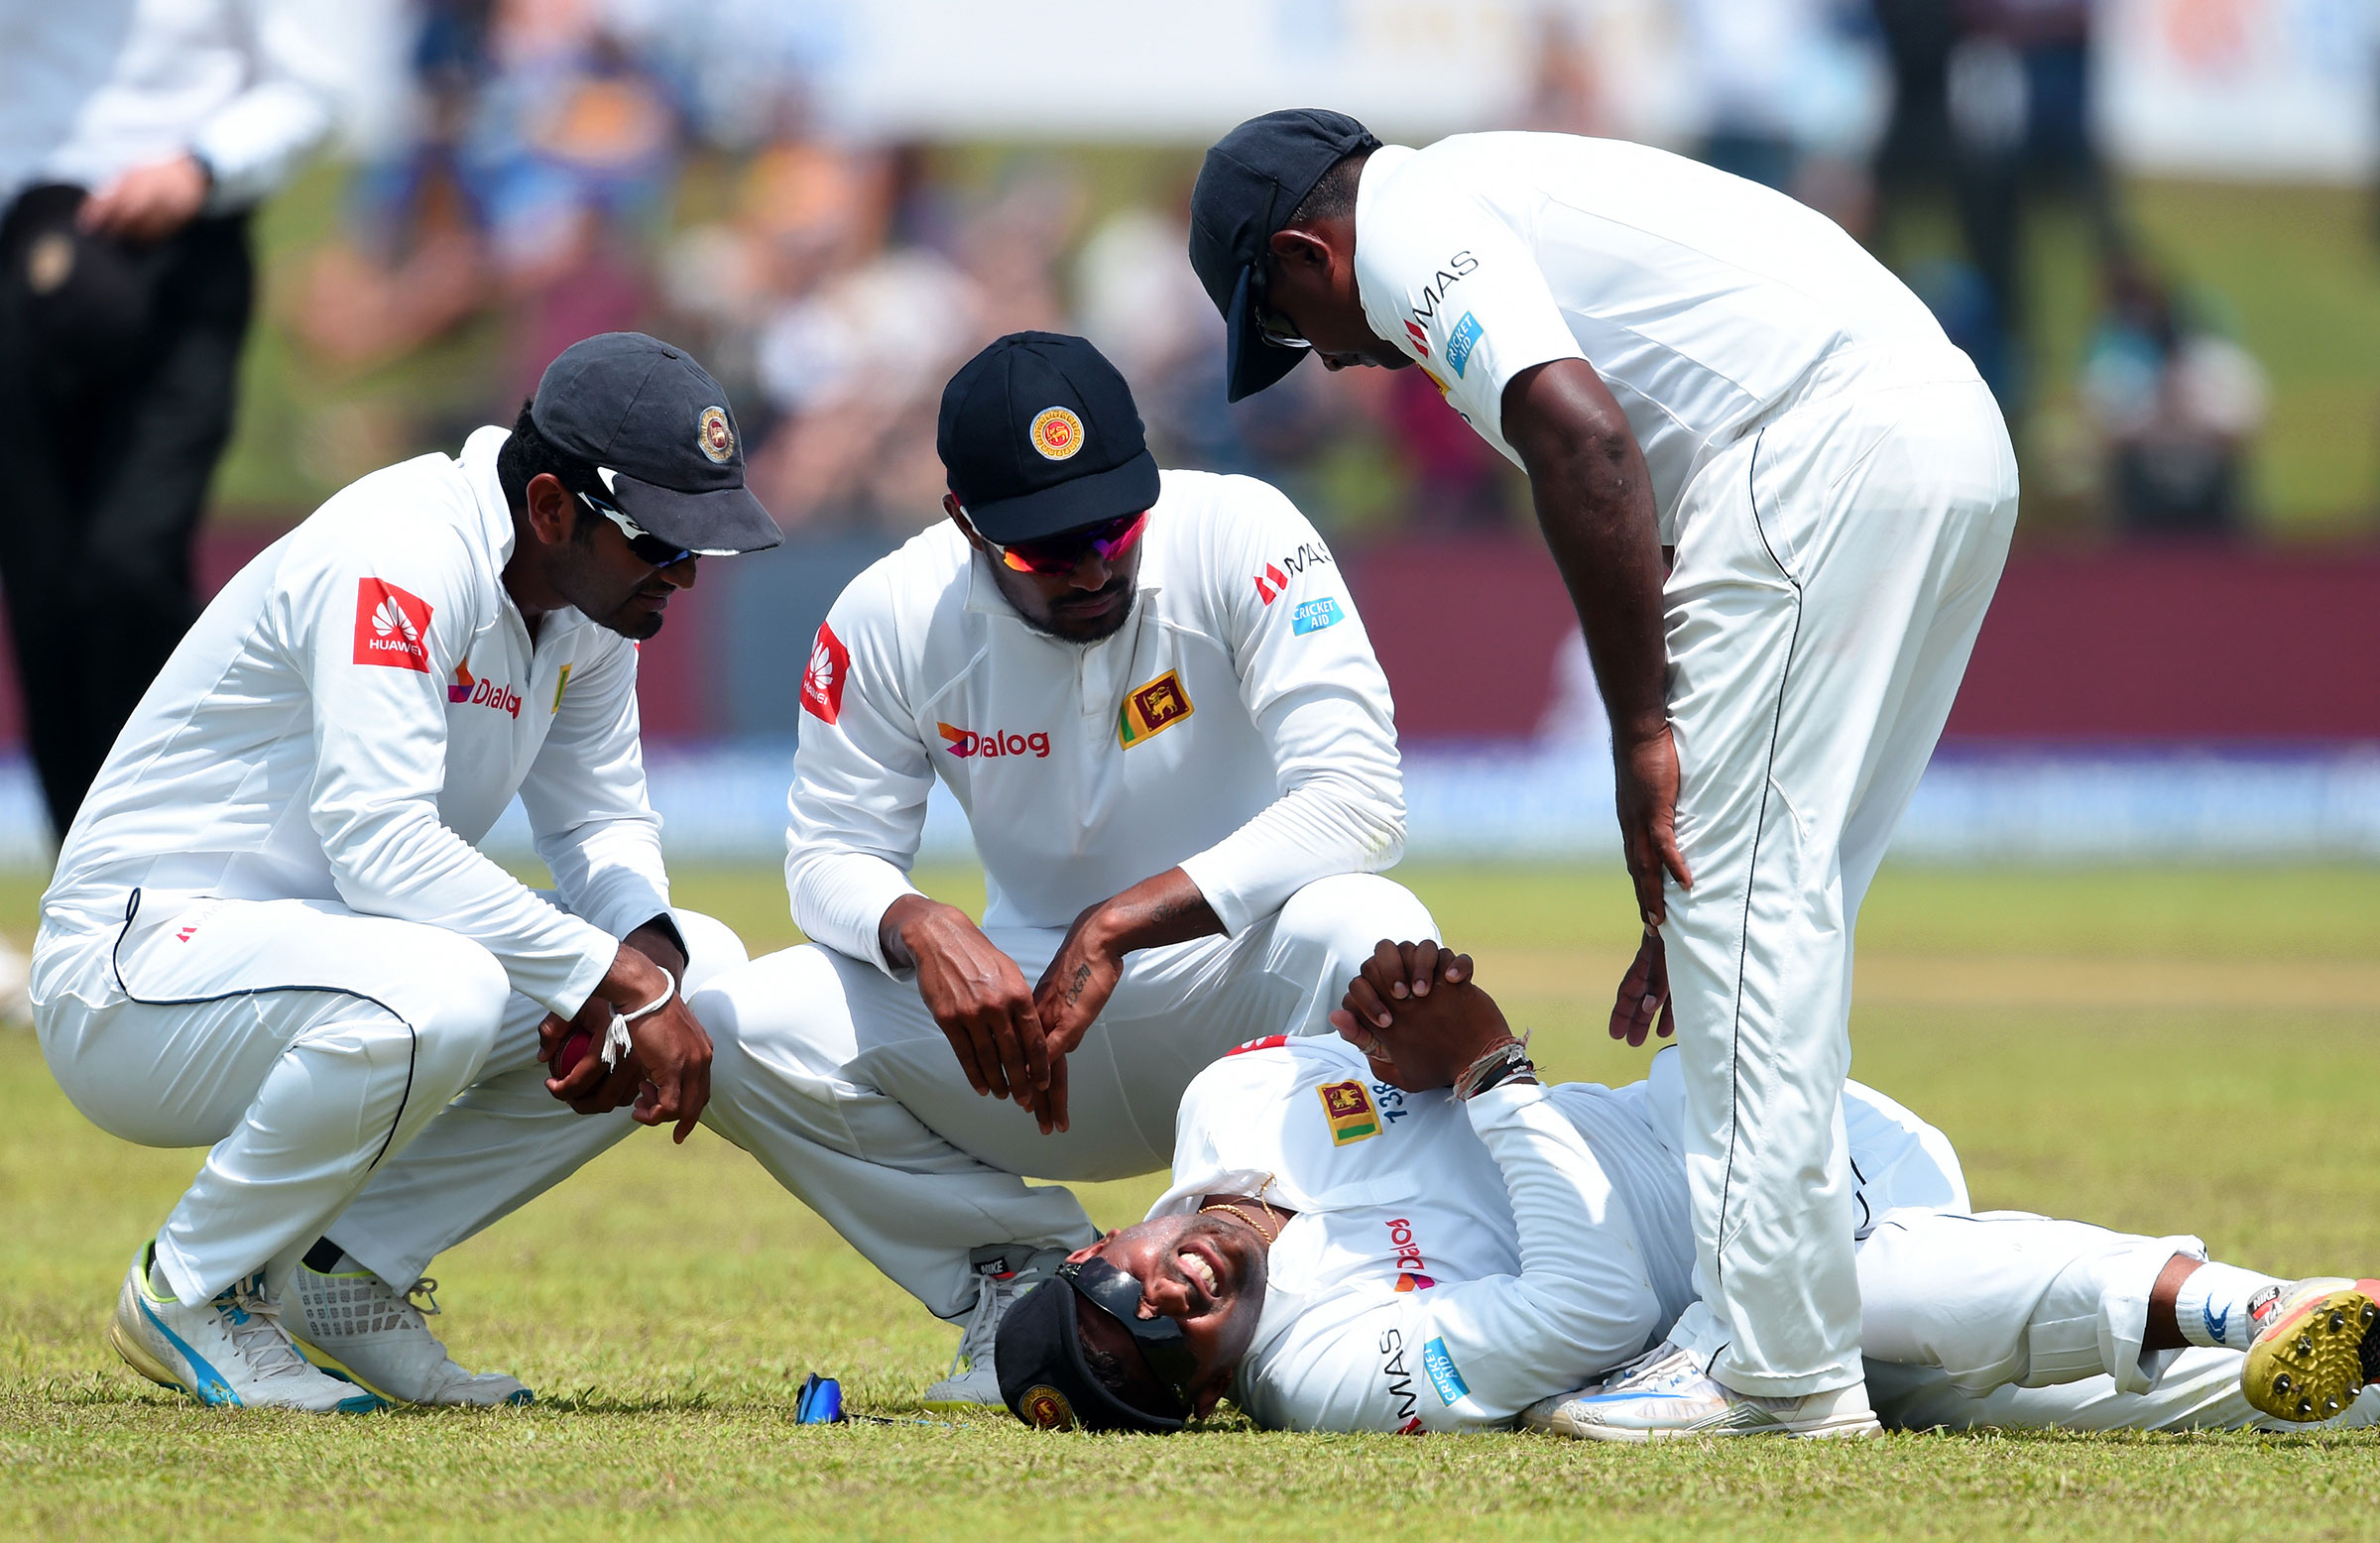 Cricket Injuries | Prevention and Treatment